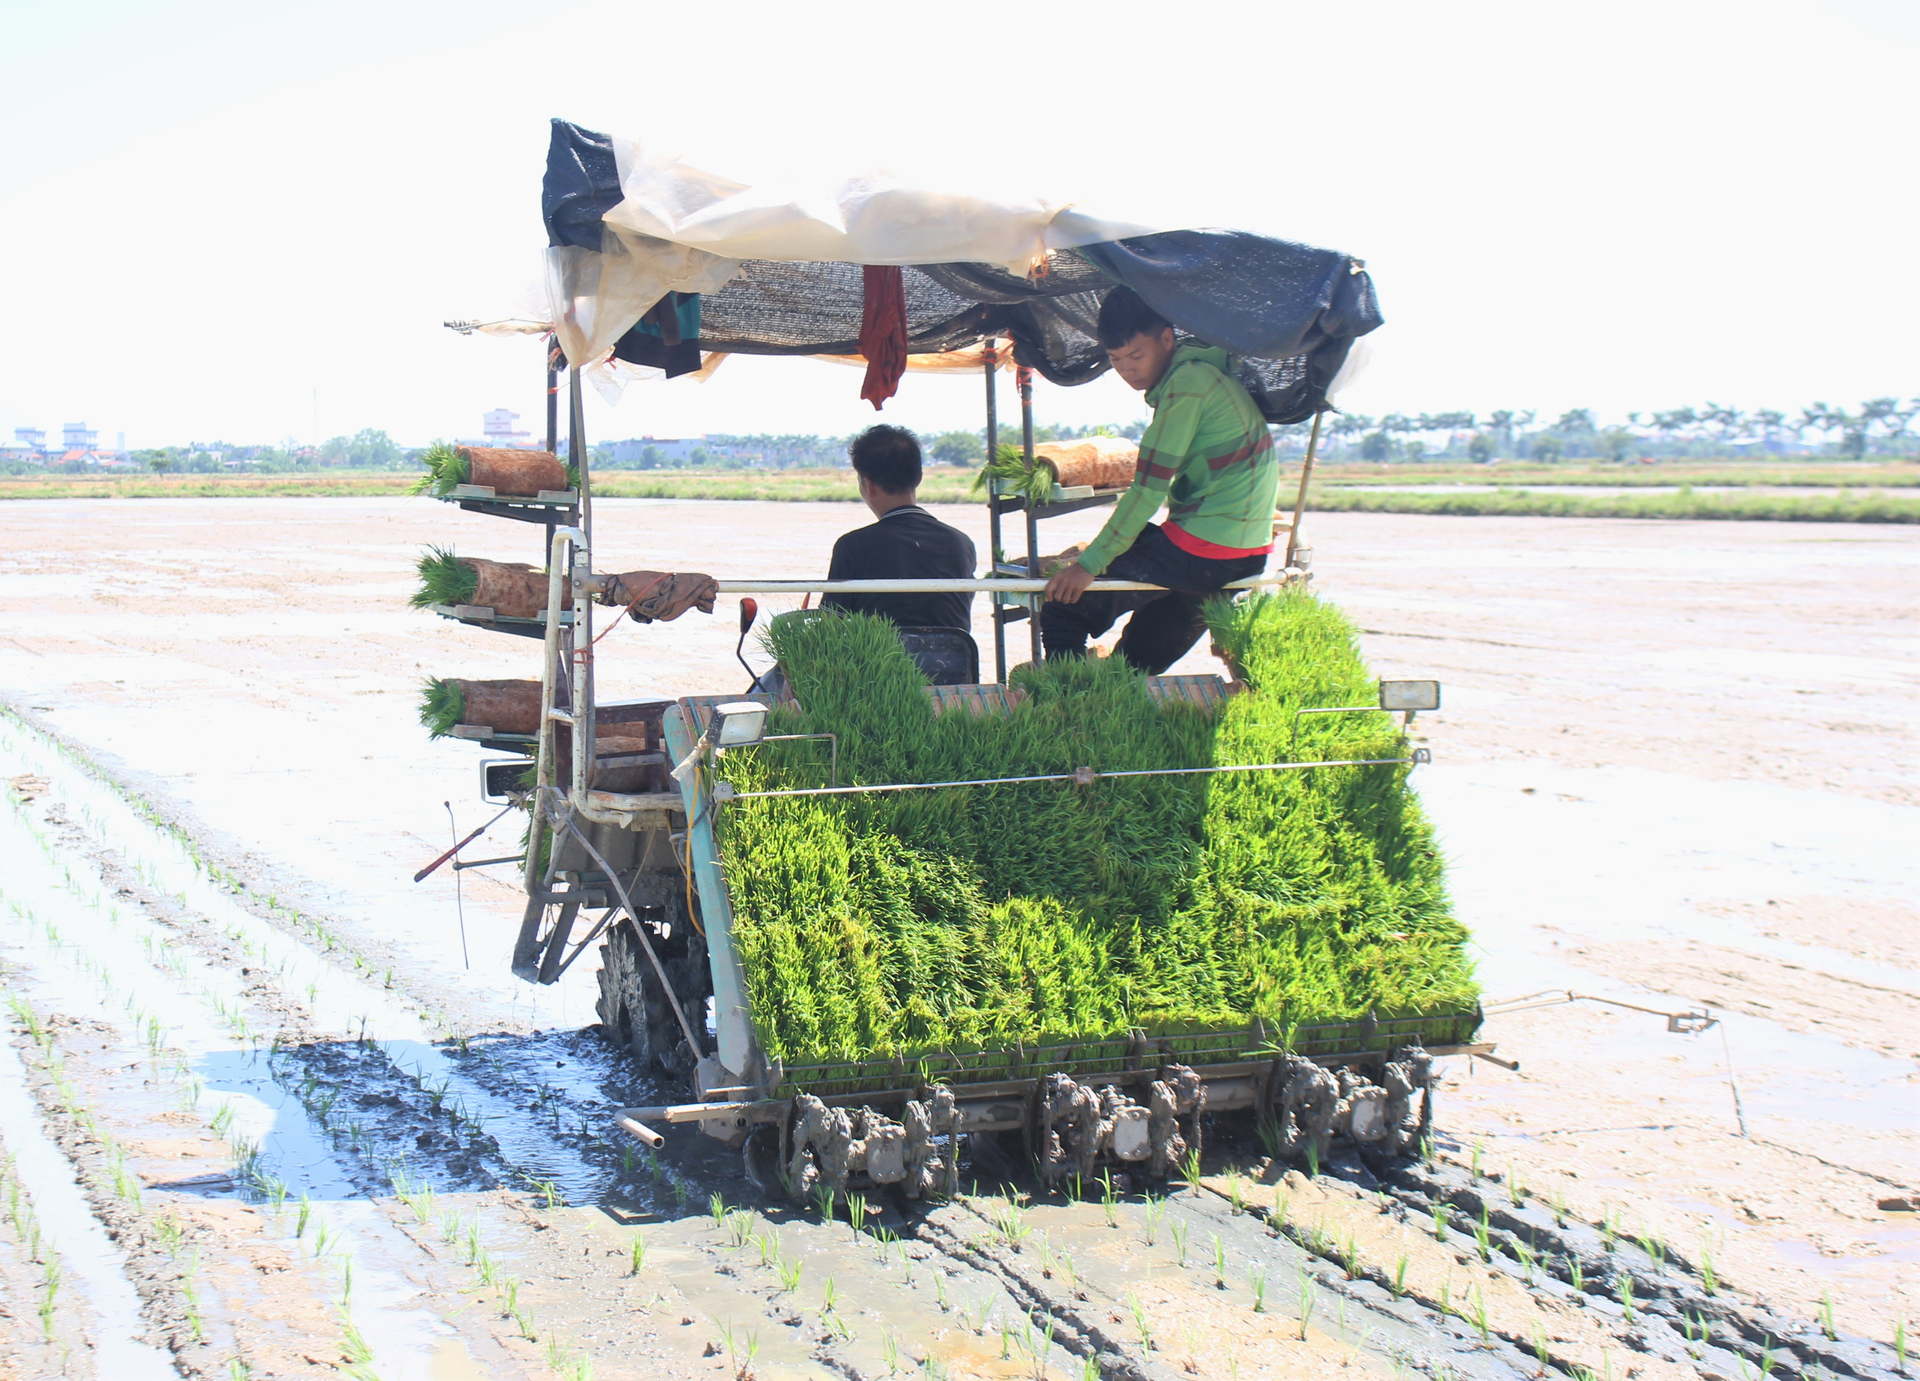 Many difficulties and obstacles in land accumulation and concentration are hindering the introduction of gender into production. Photo: Hoang Anh.